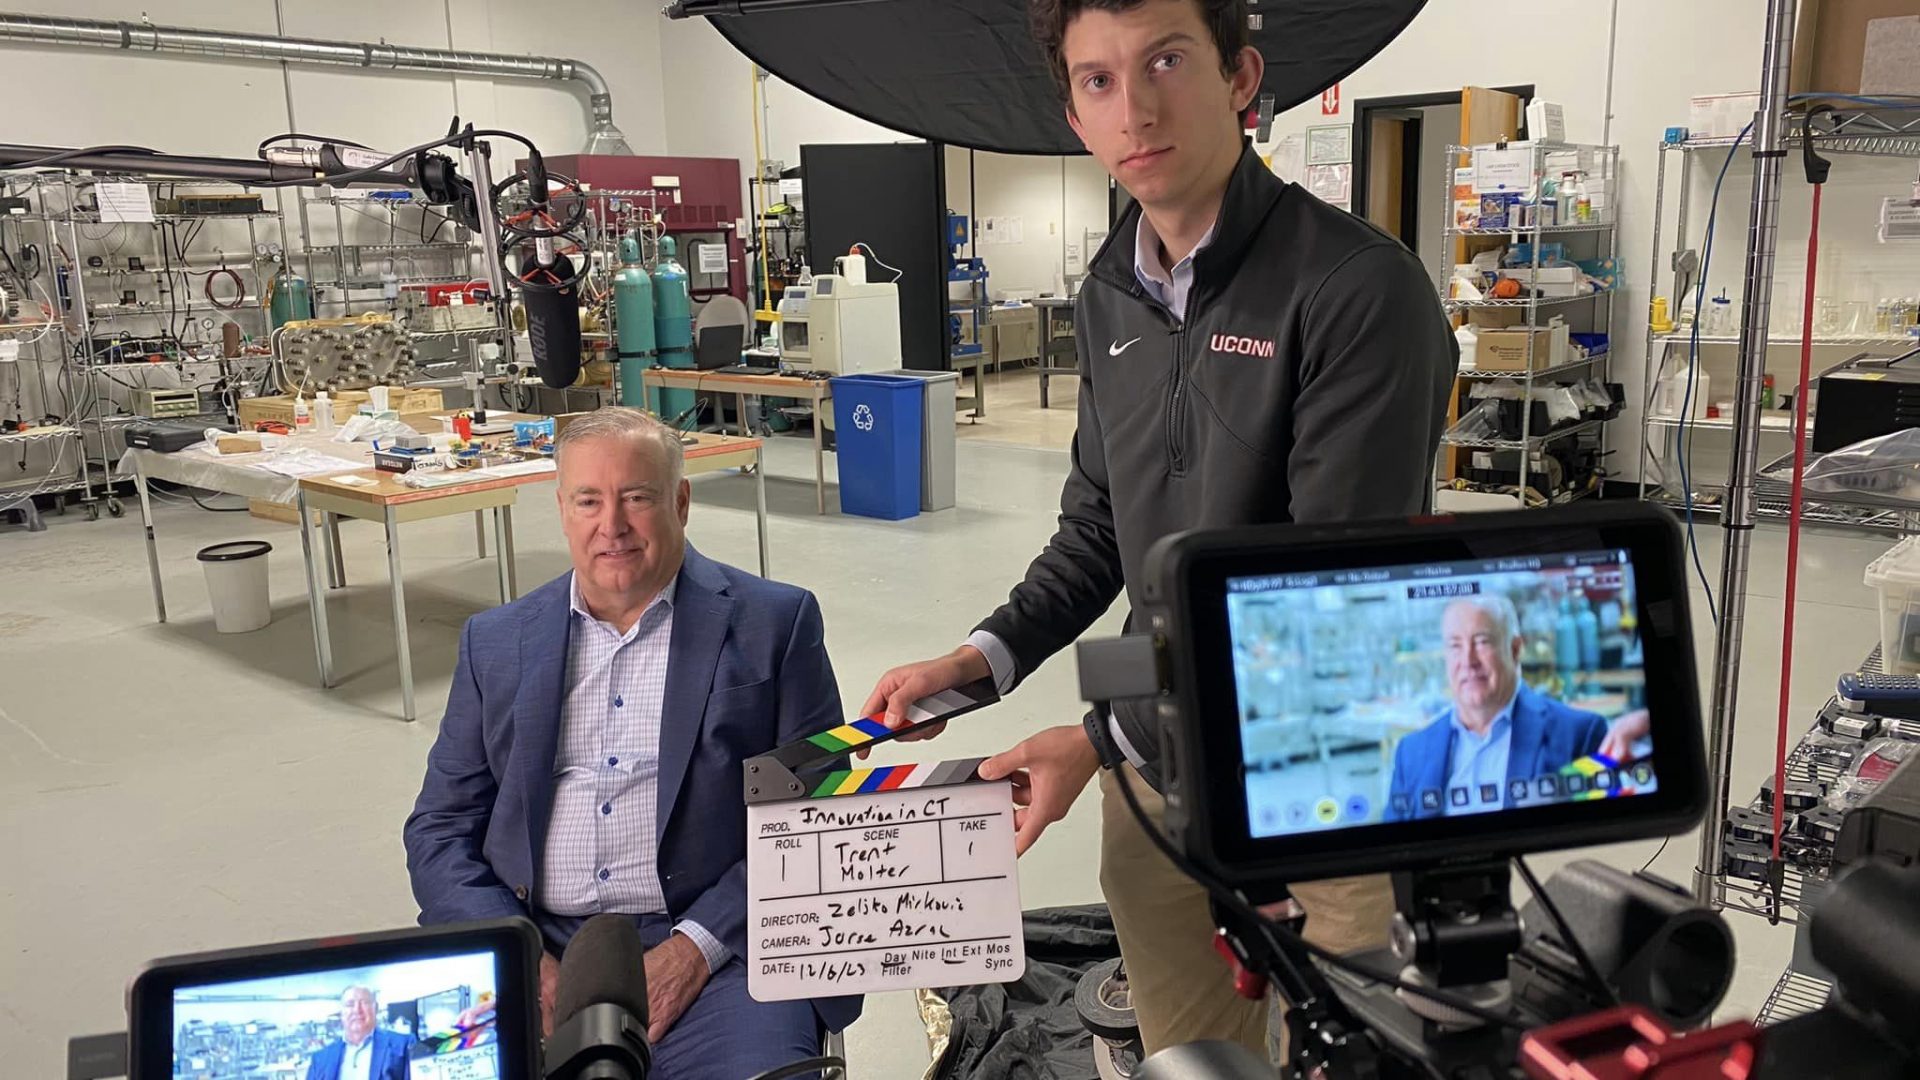 Trent Molter Filming documentary “Innovation in Connecticut “